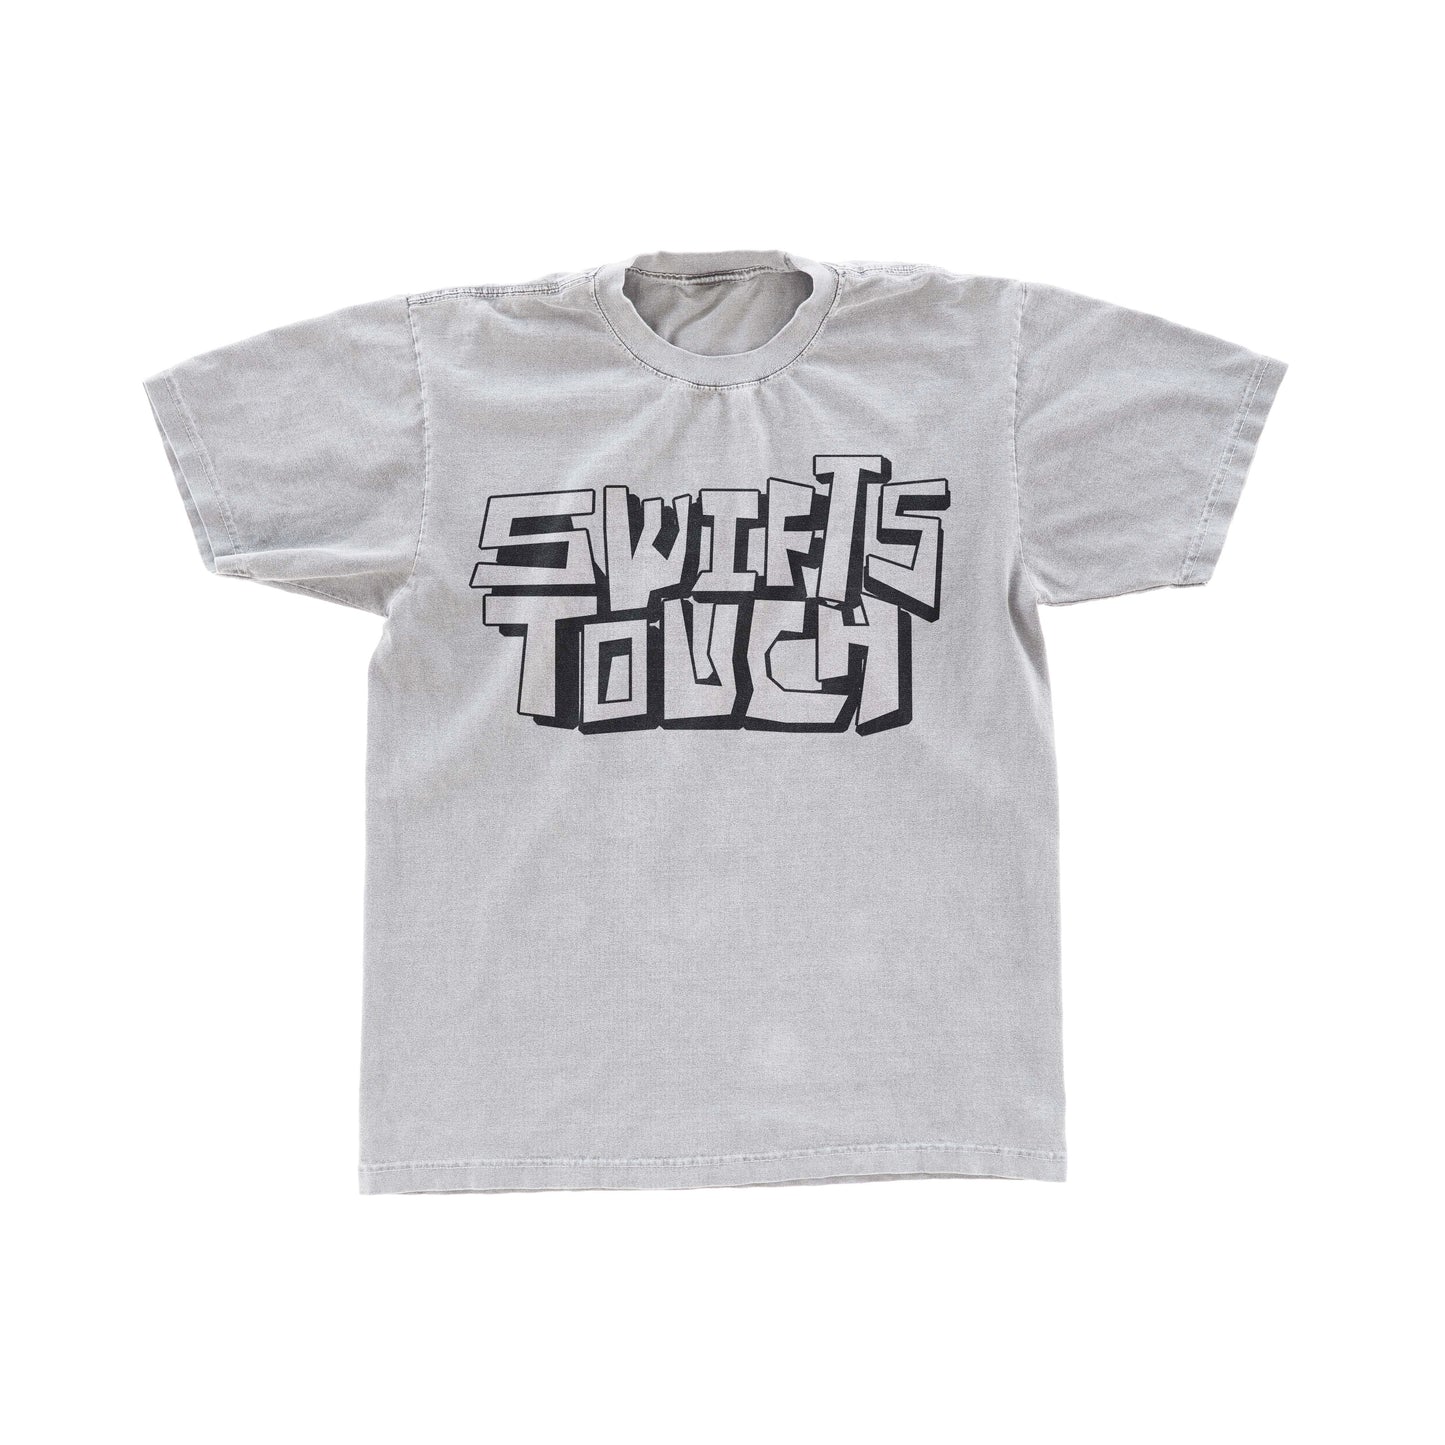 Swifts Touch Essential T